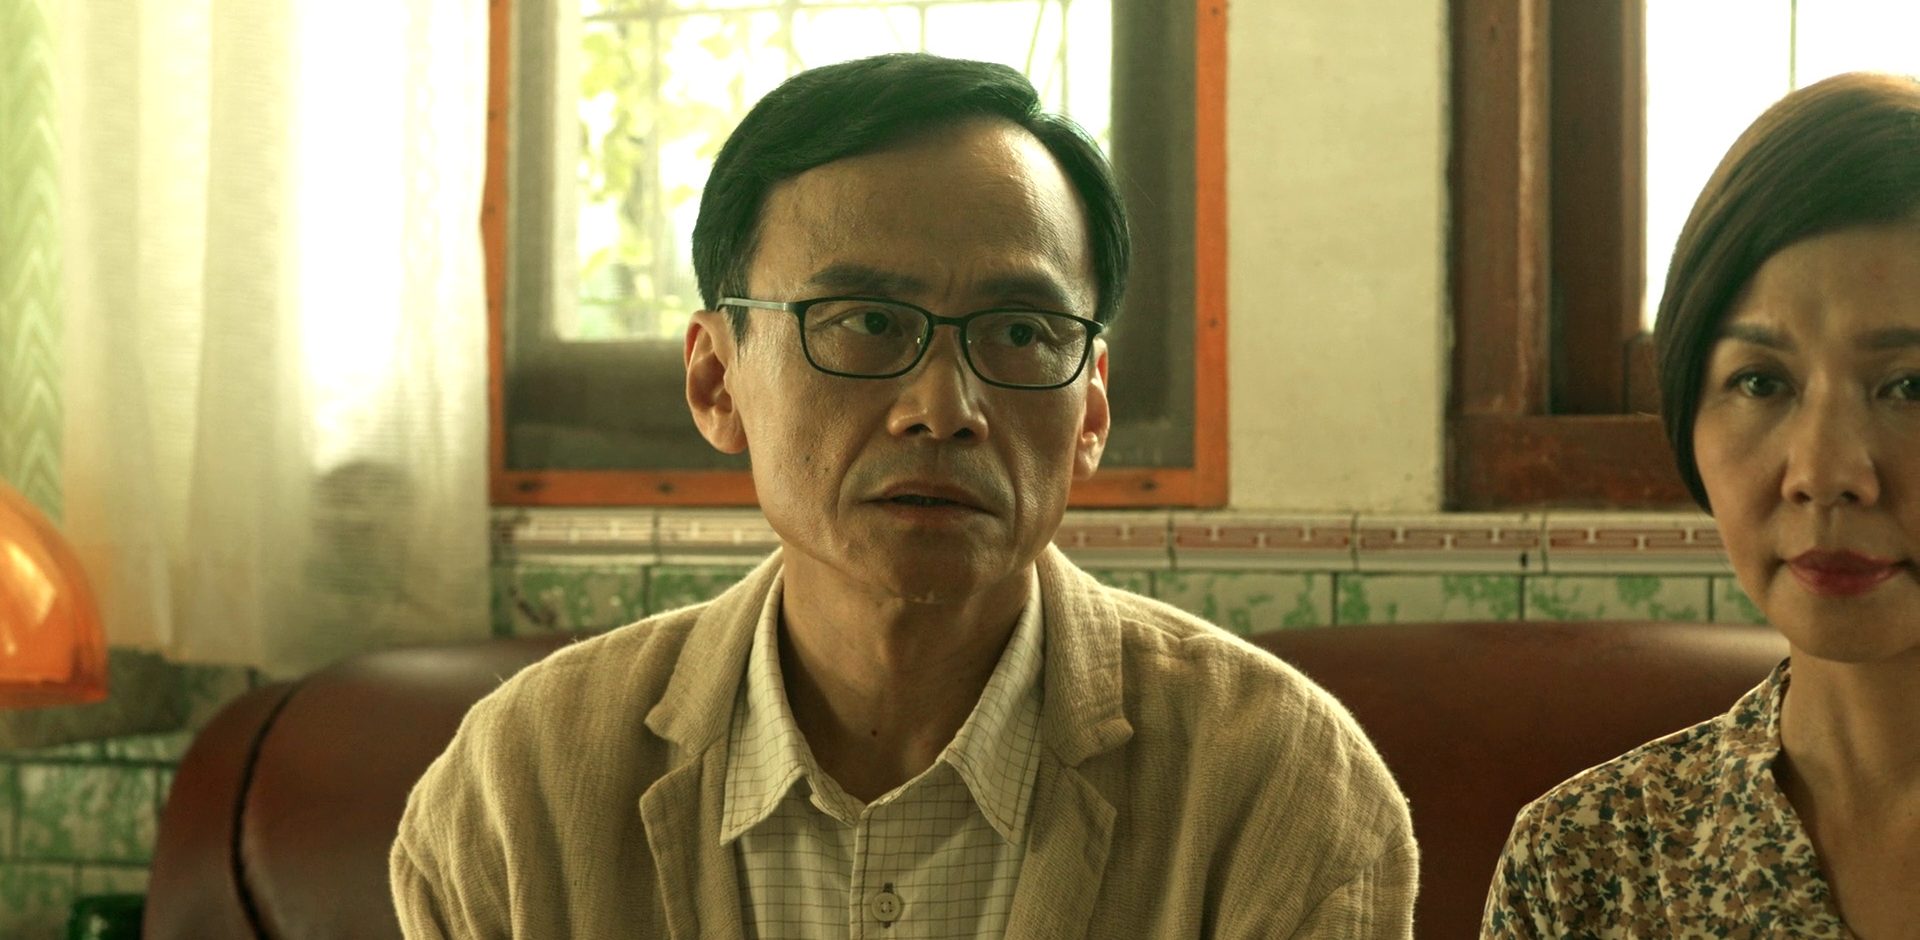 Who Killed Hsieh Chih-chung? How is He Still Alive in Shards of Her?